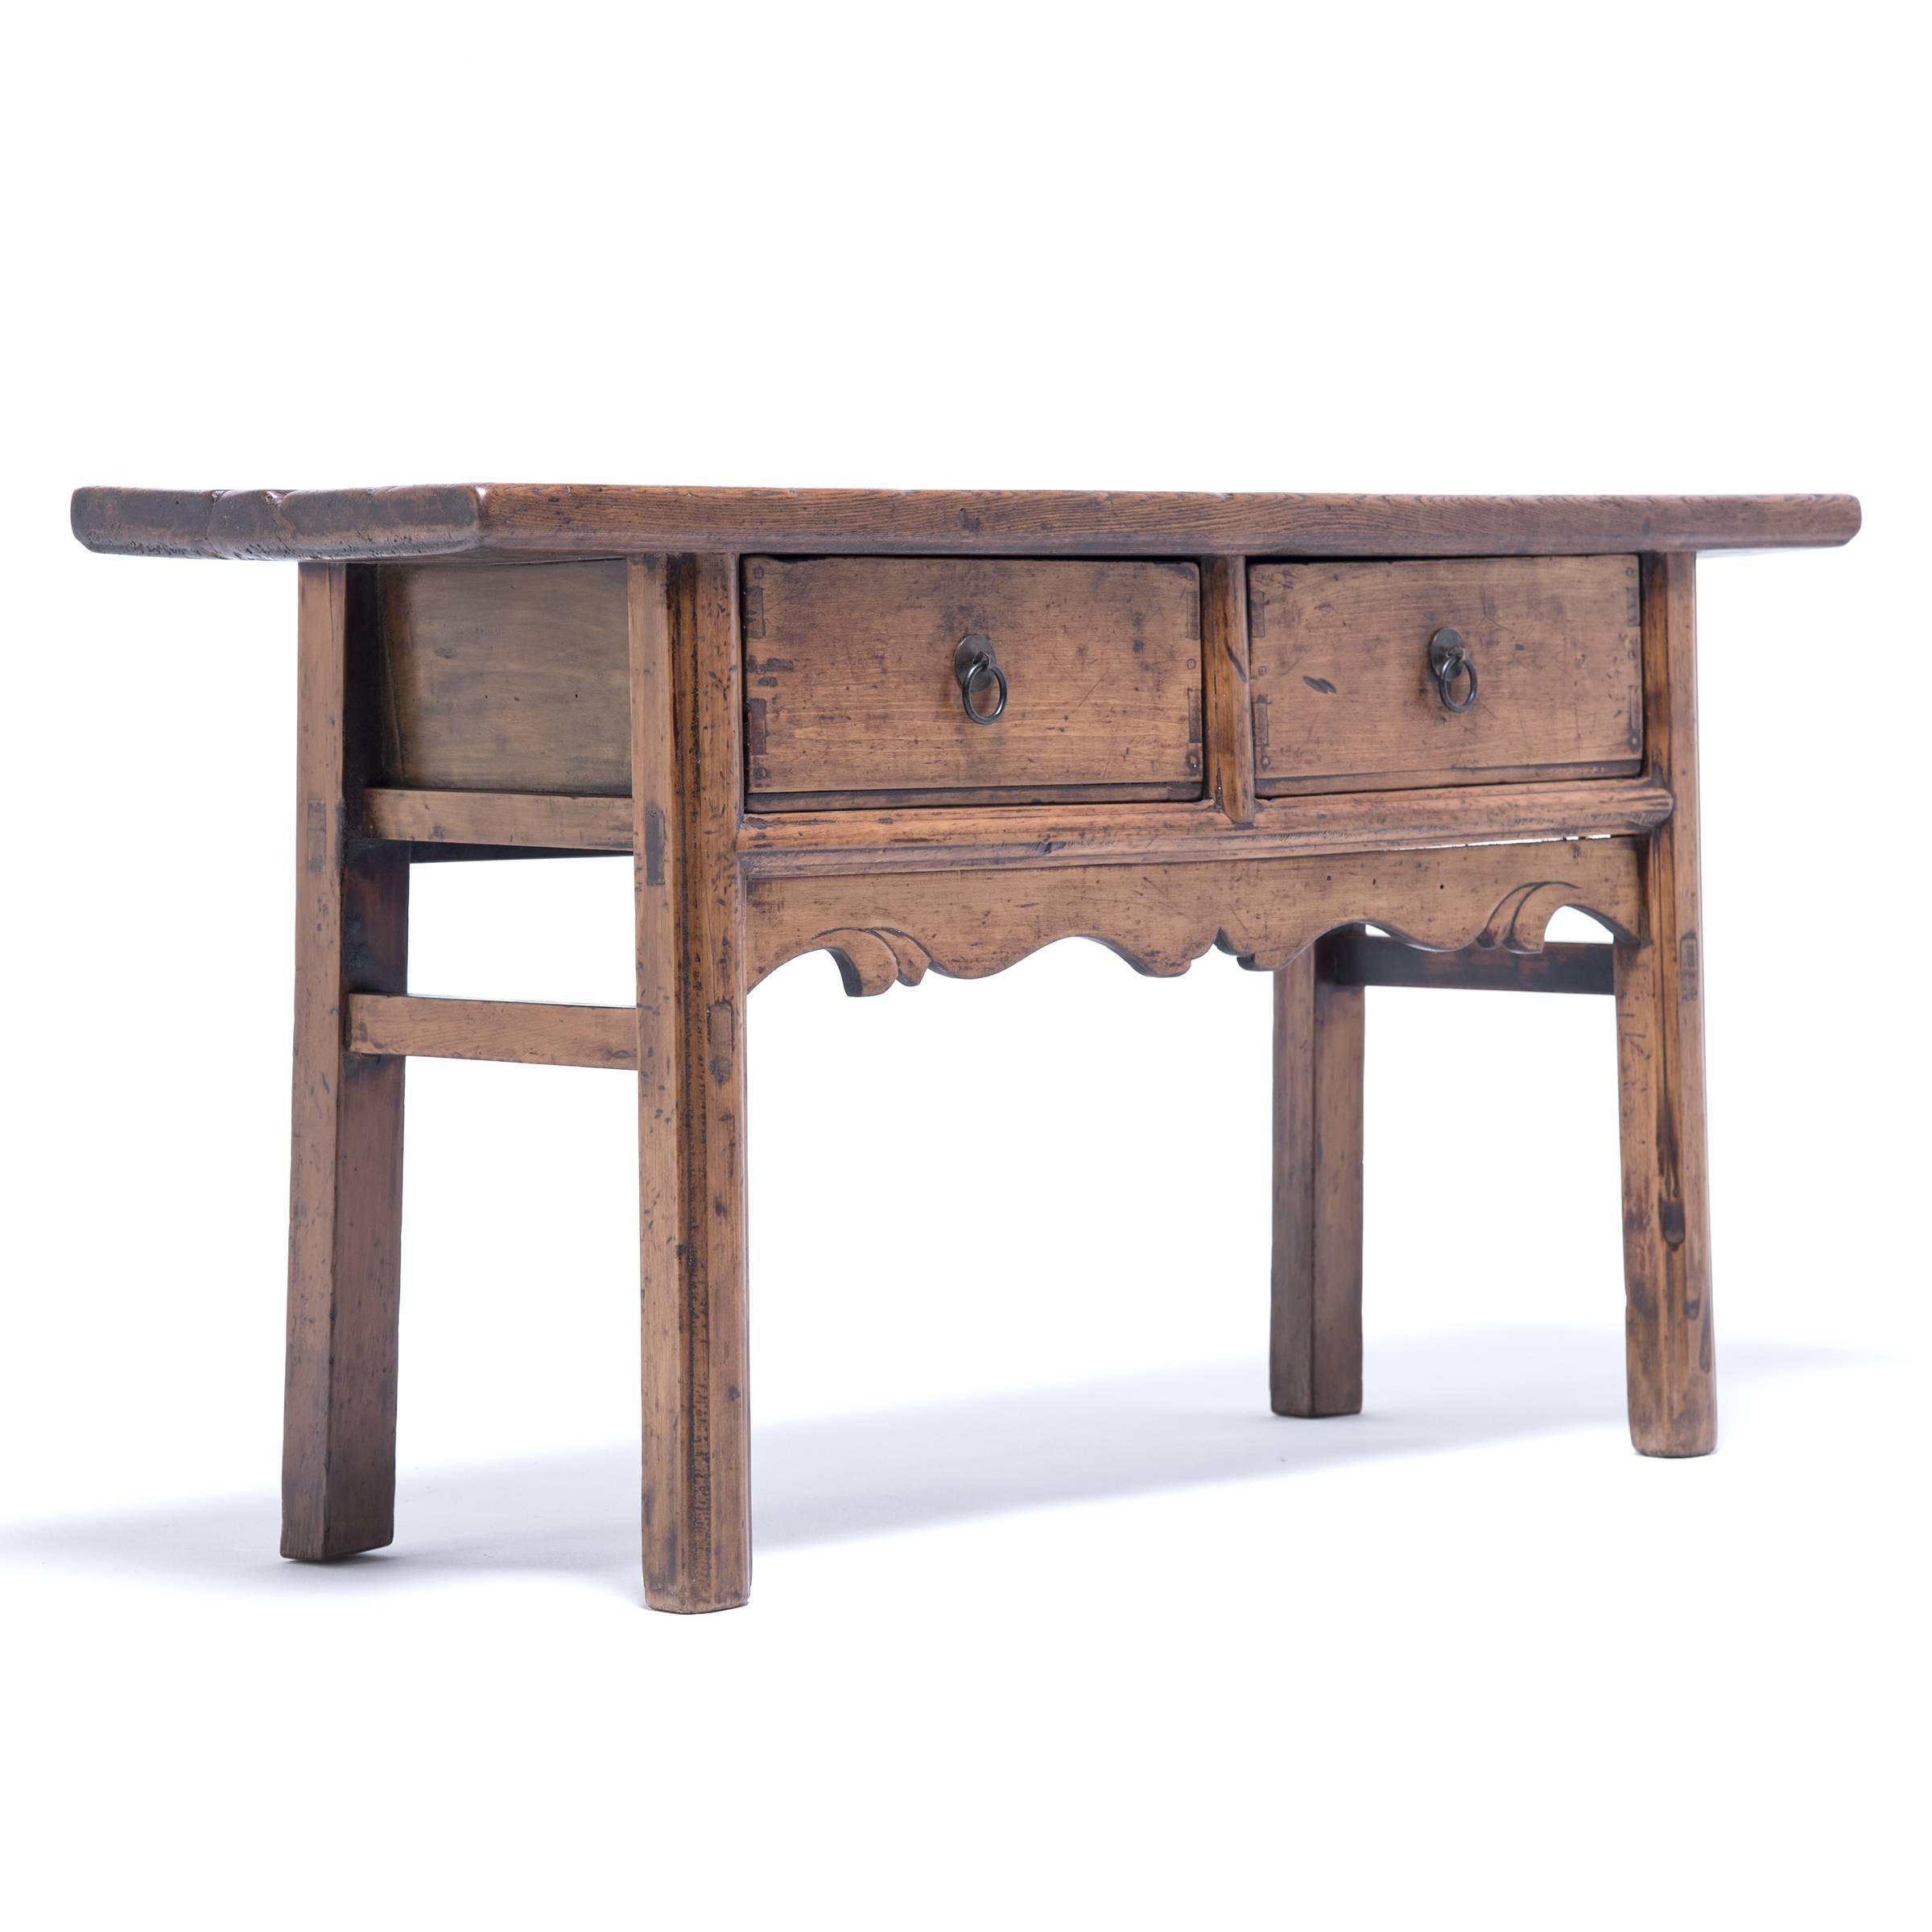 This provincial 19th century table was made by hand with lyrical lines and classical proportions. It stands pure, simple and proud and is easily identified by its arched and cusped apron. The double drawers were opened many times to retrieve curios,